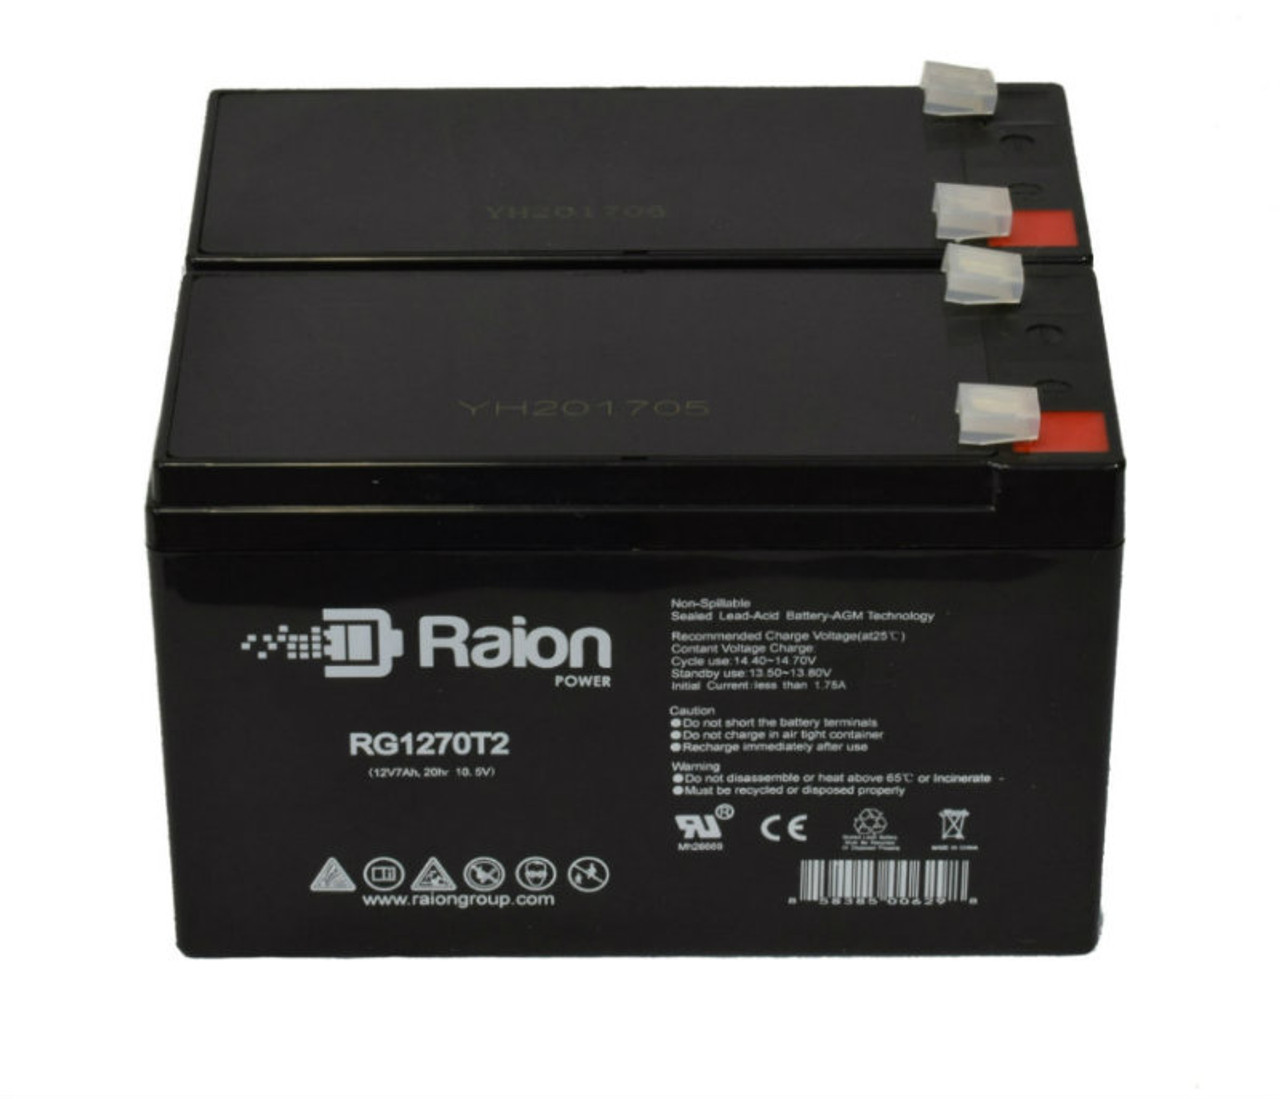 Raion Power Replacement 12V 7Ah Battery for Vision CP1270 - 2 Pack